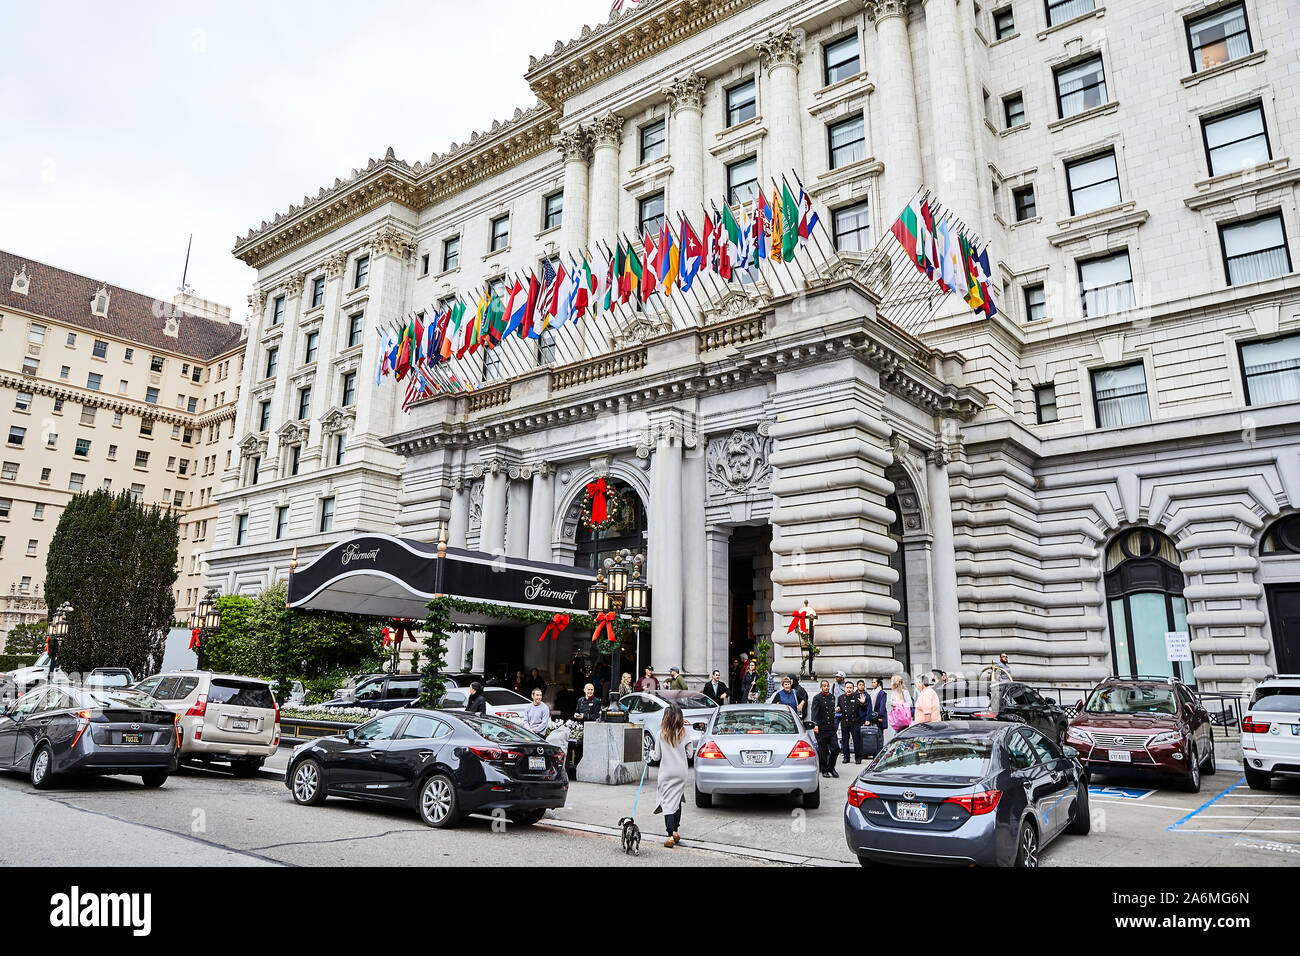 San Francisco, California, USA - December 15, 2018: Christmas for Tourists and Travelers at the busy Fairmont Hotel Stock Photo